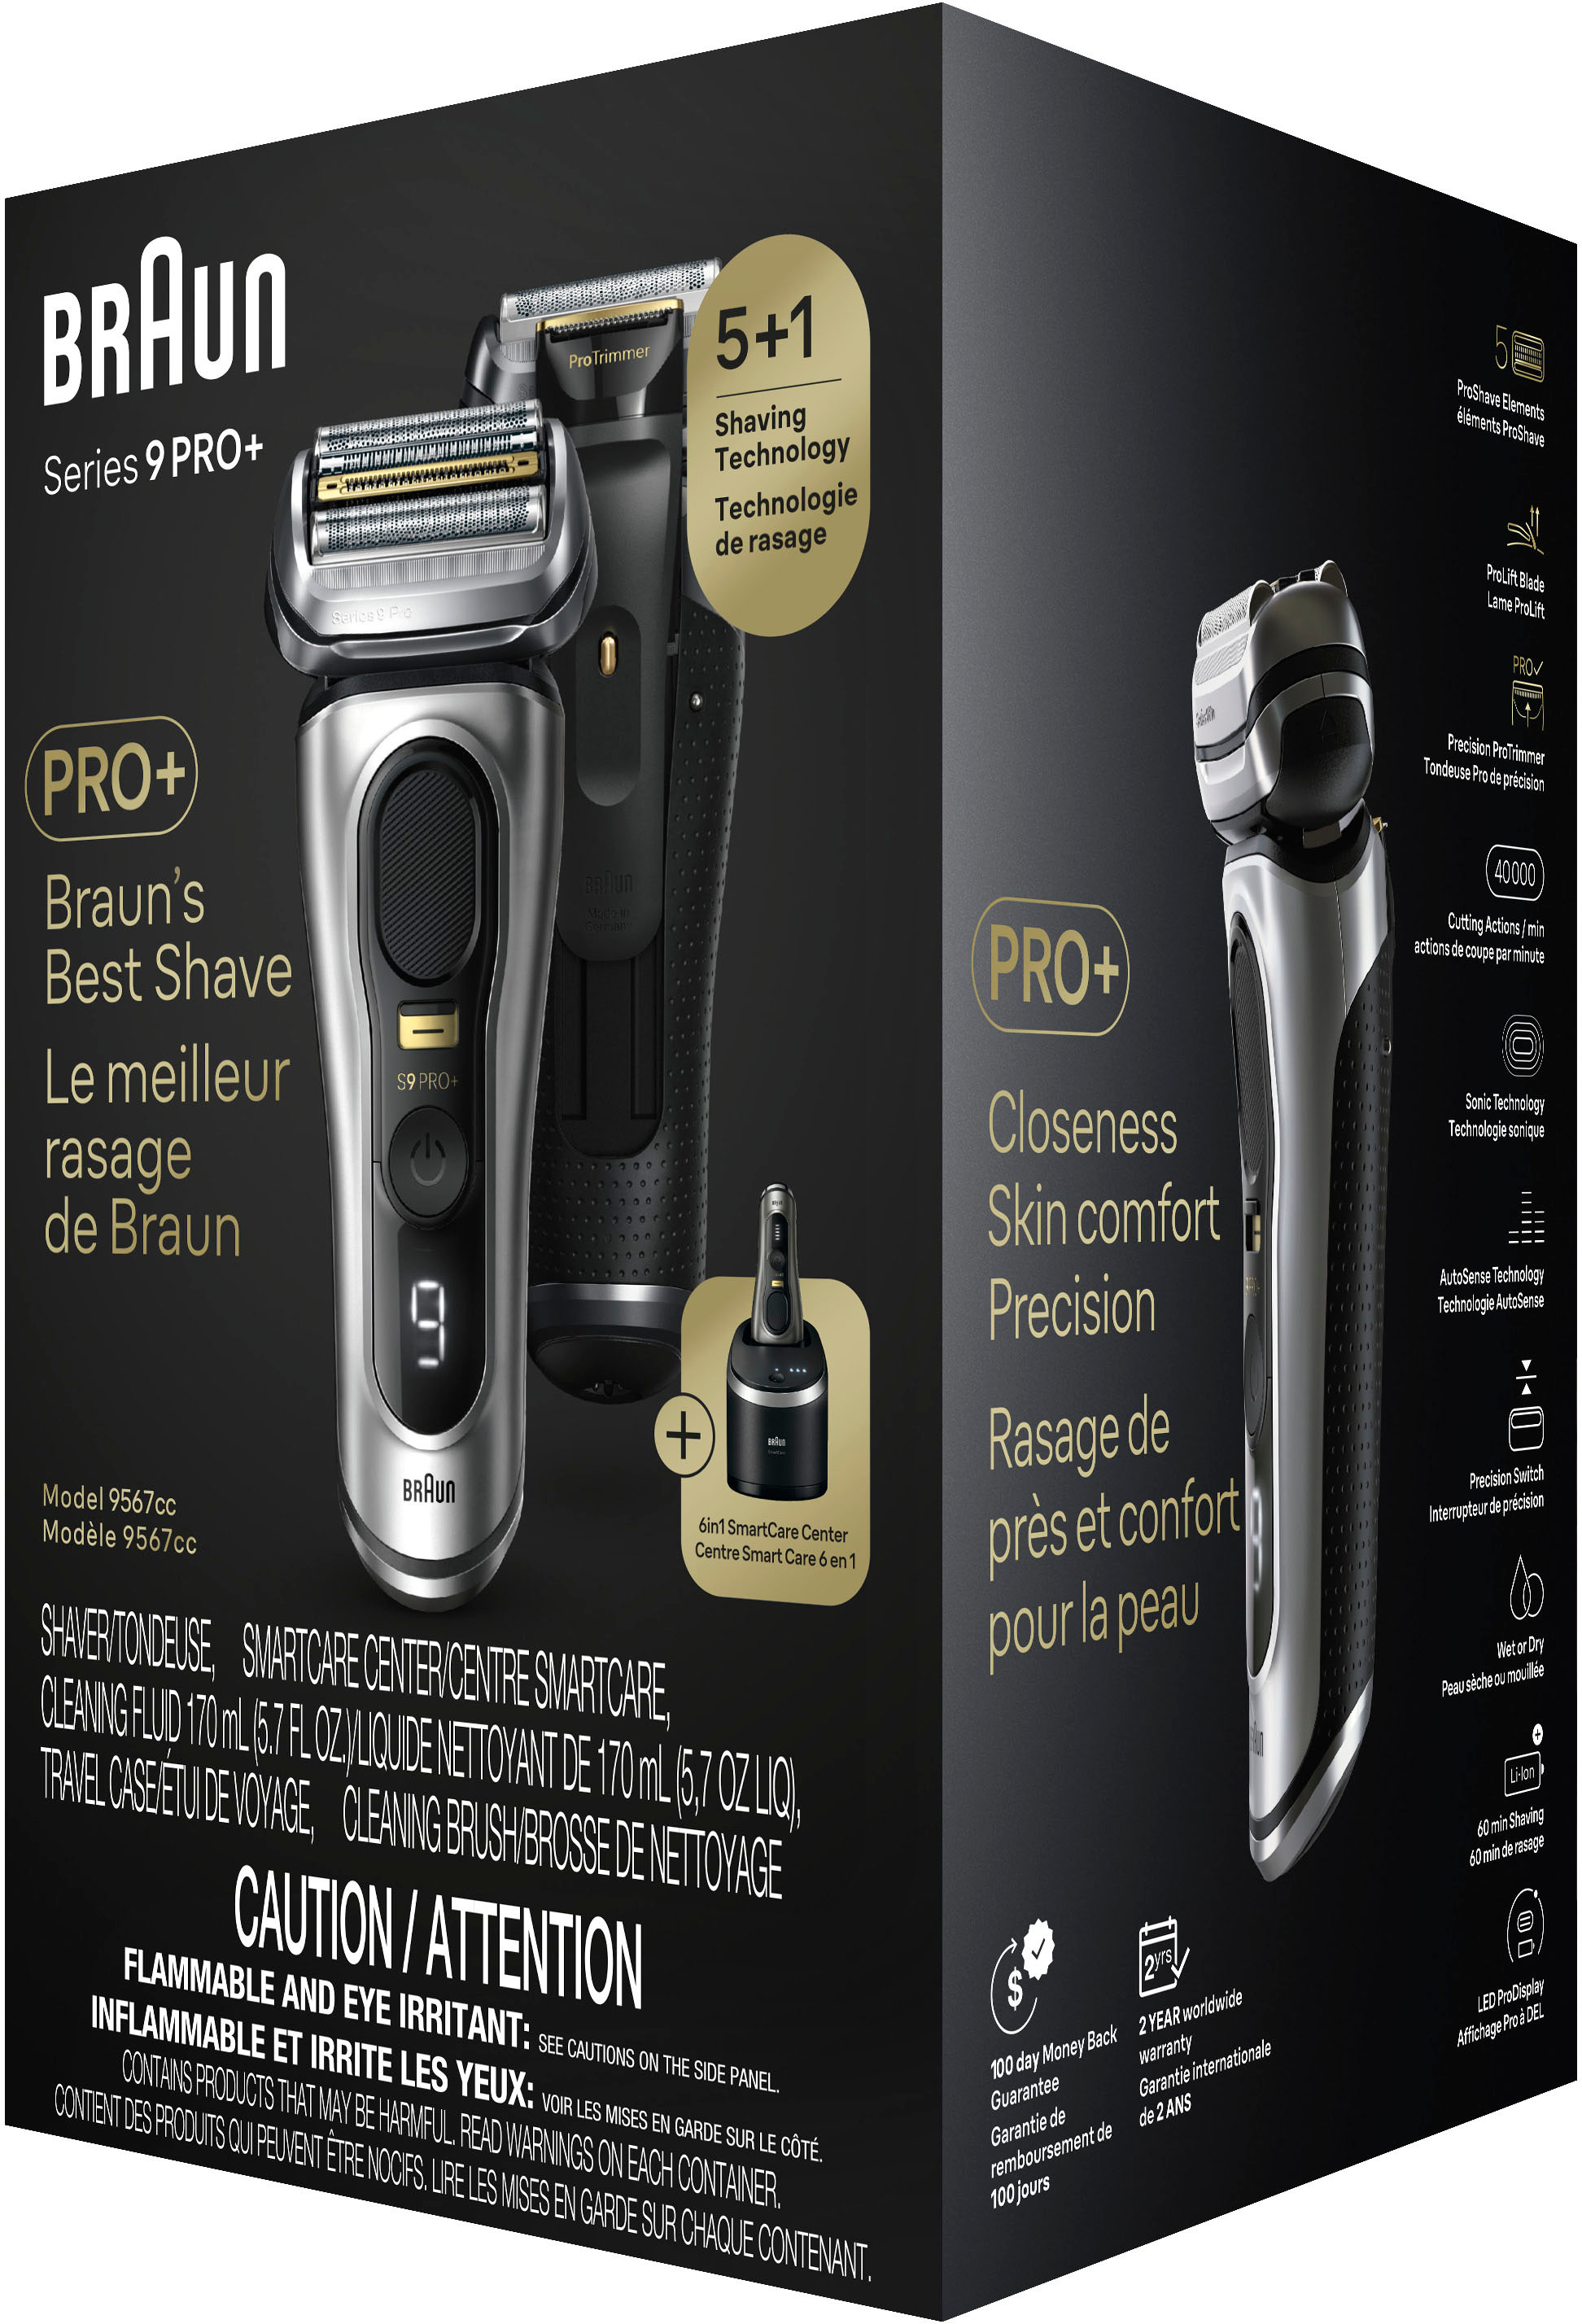 in SmartCare 6 9567cc 9 Silver Buy Series Center PRO+ 1 Braun Shaver - Electric with Best